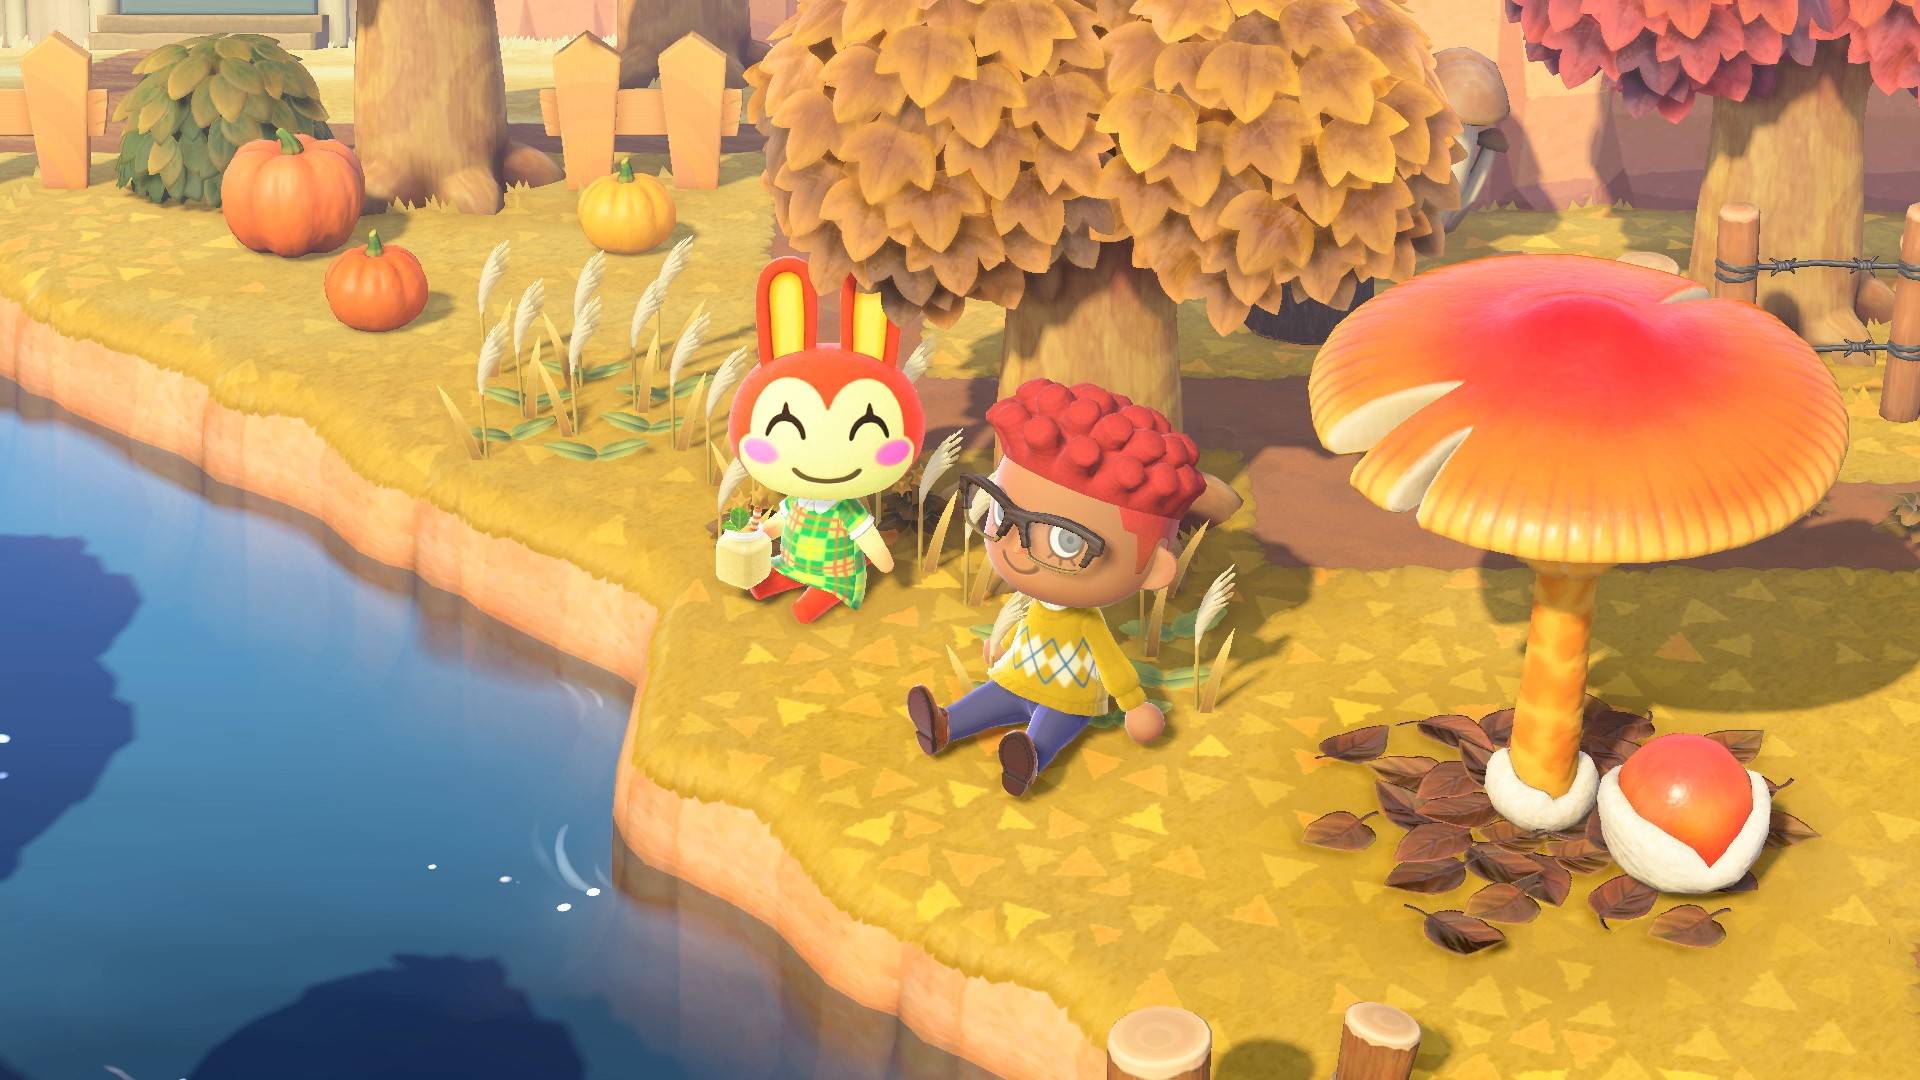 Despite updates, some Animal Crossing fans are burned out - Polygon